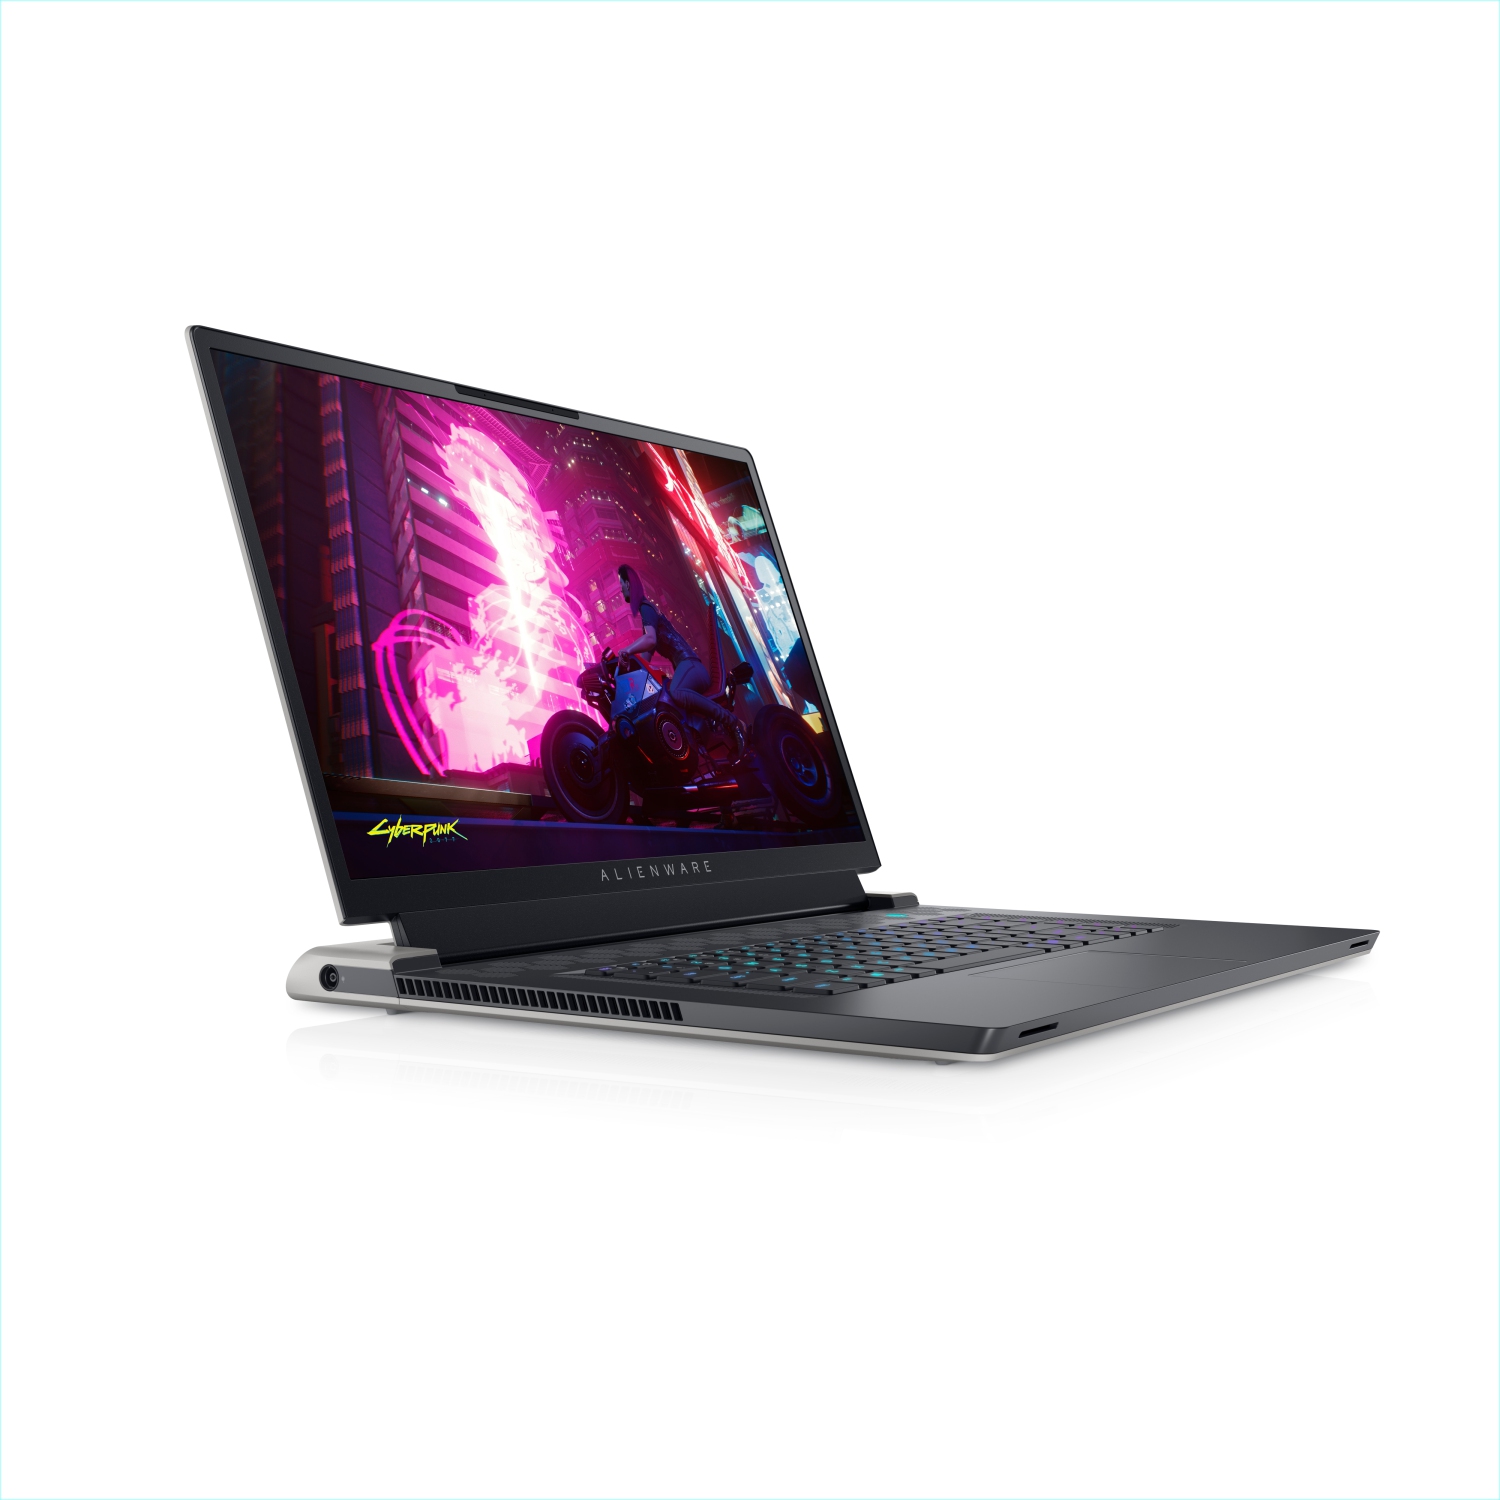 Refurbished (Excellent) – Dell Alienware X17 R1 Gaming Laptop (2021) | 17.3" FHD | Core i7 - 2TB SSD + 2TB SSD - 16GB RAM - RTX 3070 | 8 Cores @ 4.6 GHz - 11th Gen CPU - 8GB GDDR6